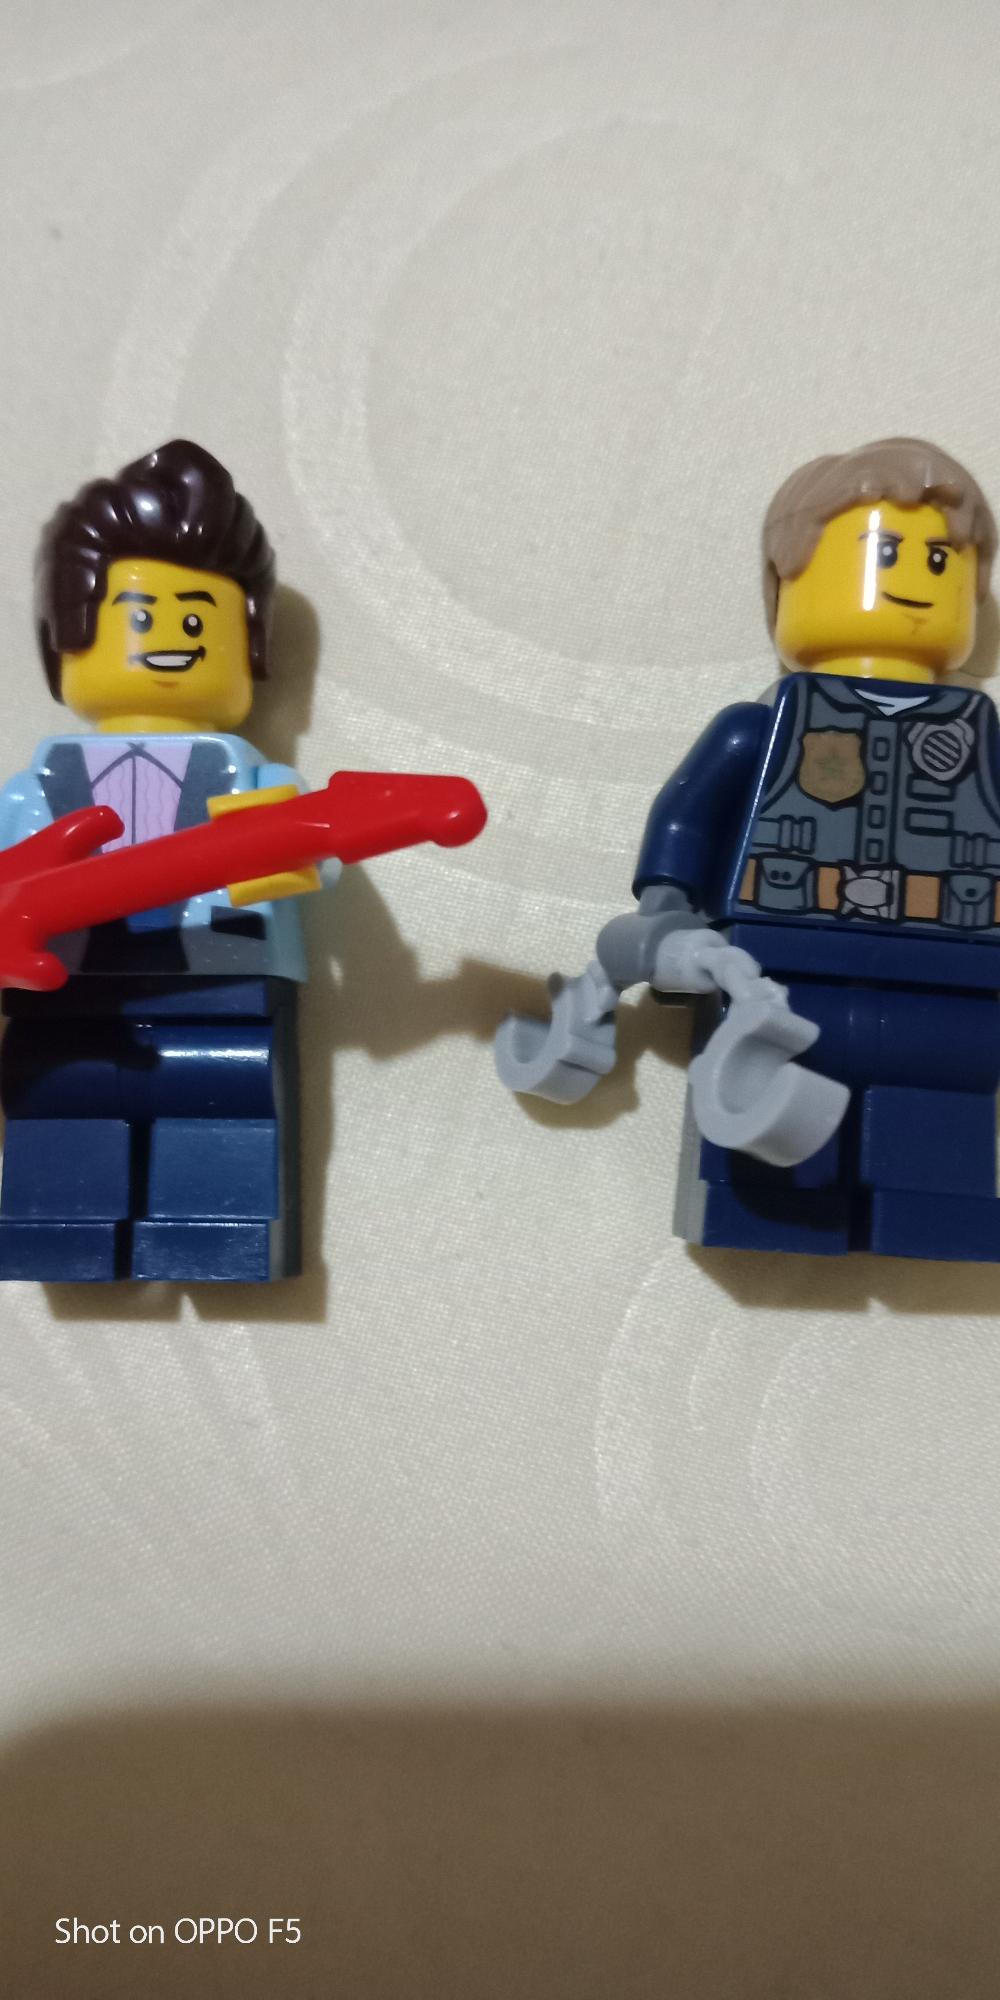 Are these special minifigures?